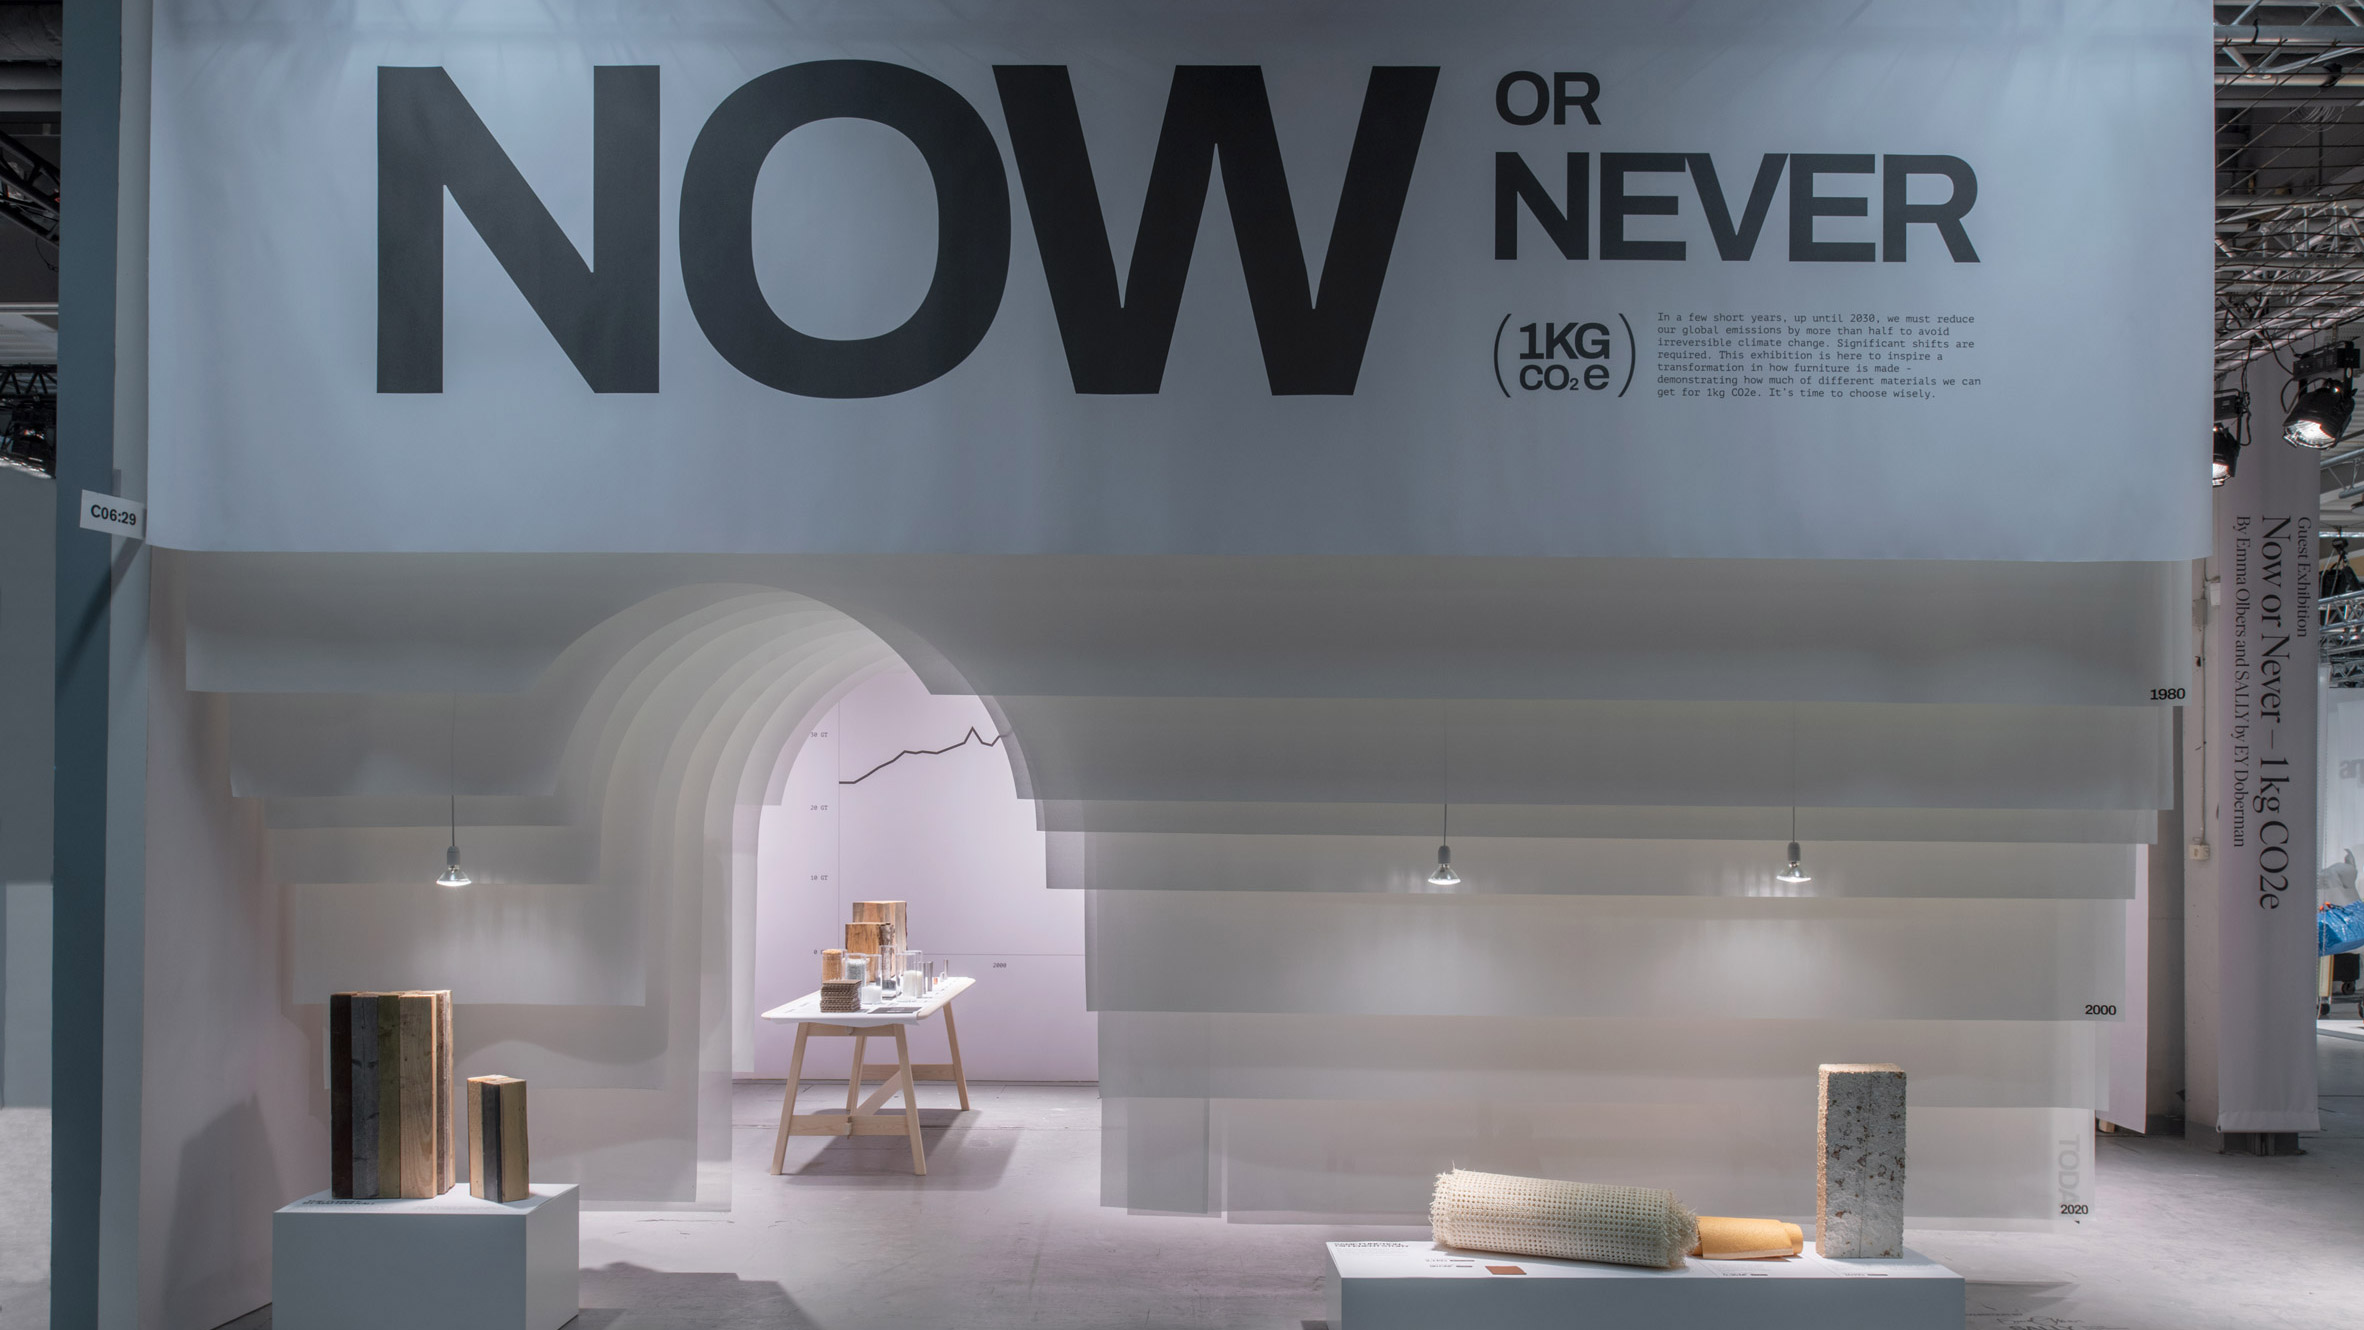 Now or Never exhibition visualises carbon emissions of common 